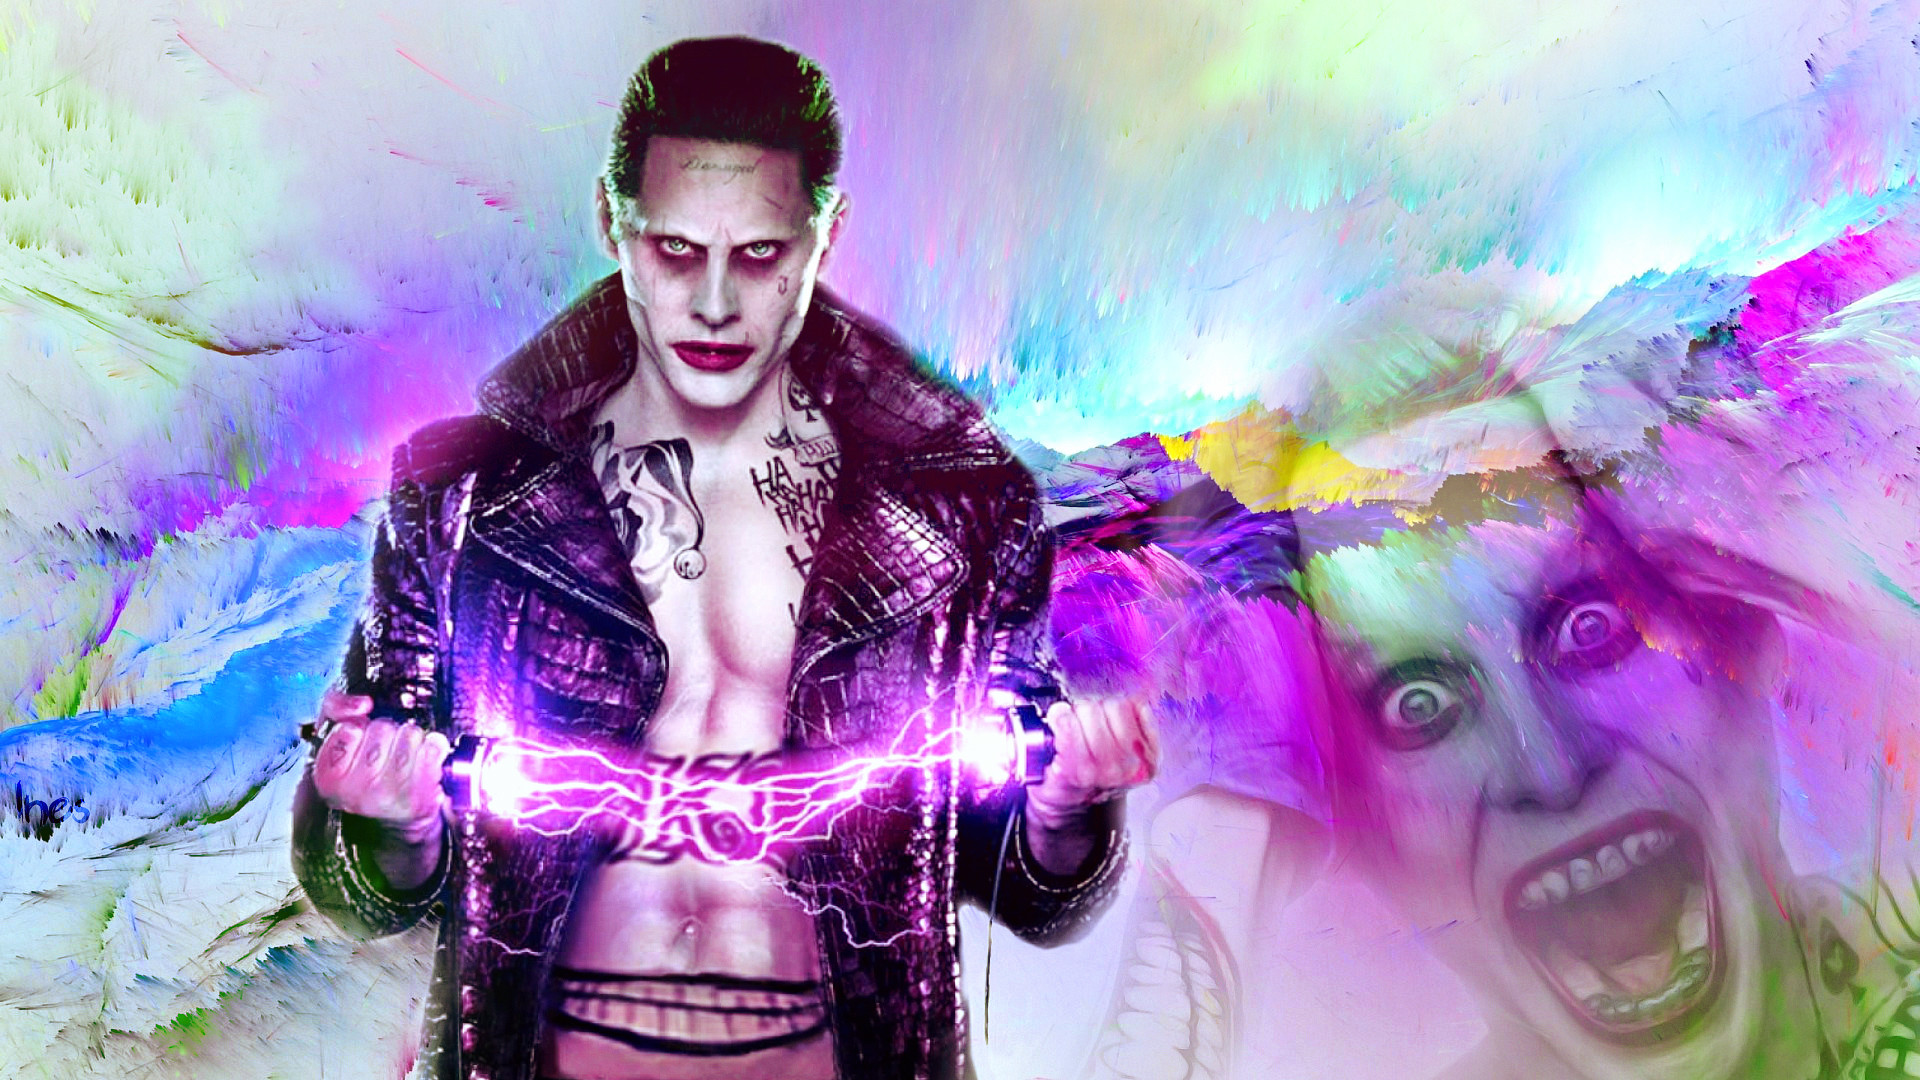 1920x1080 Suicide Squad images Phone and PC wallpapers made by me HD wallpaper and  background photos